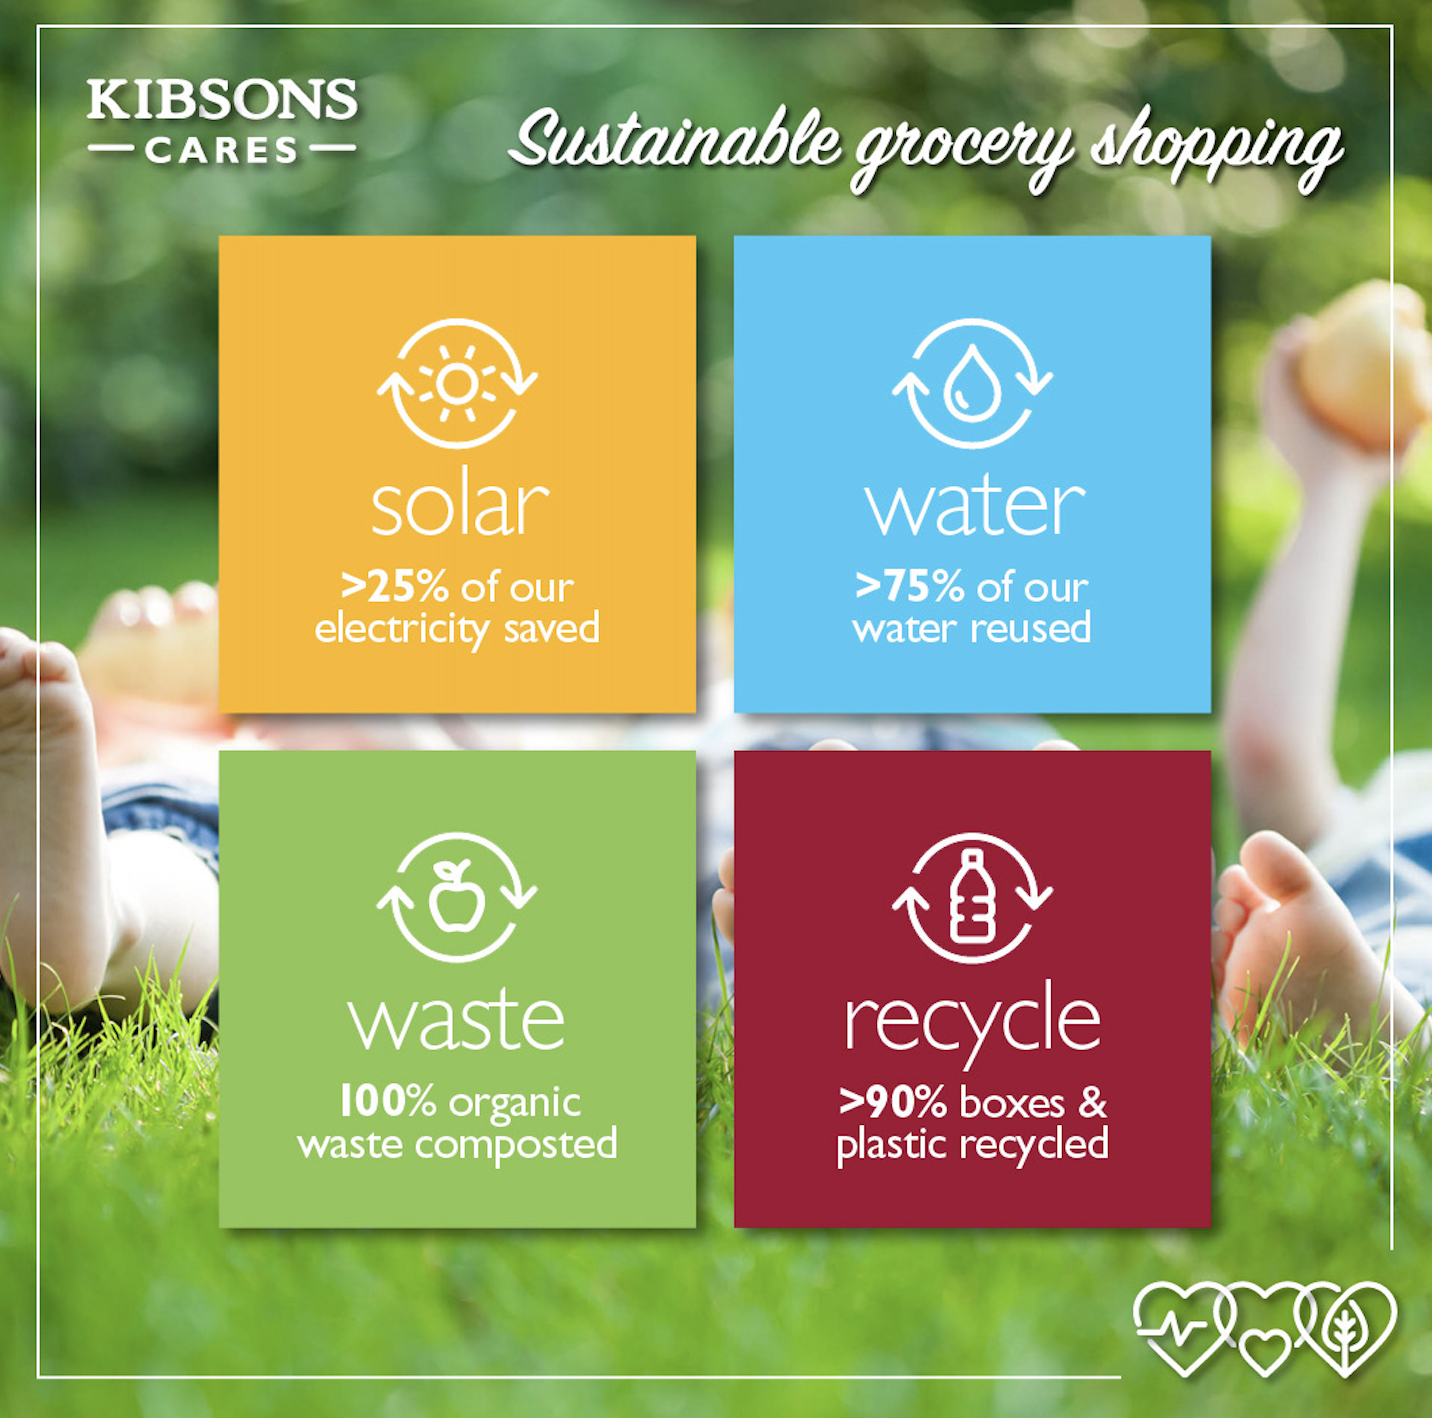 Image for Kibsons Pave The Way With Major Advances In Sustainable Food Shopping